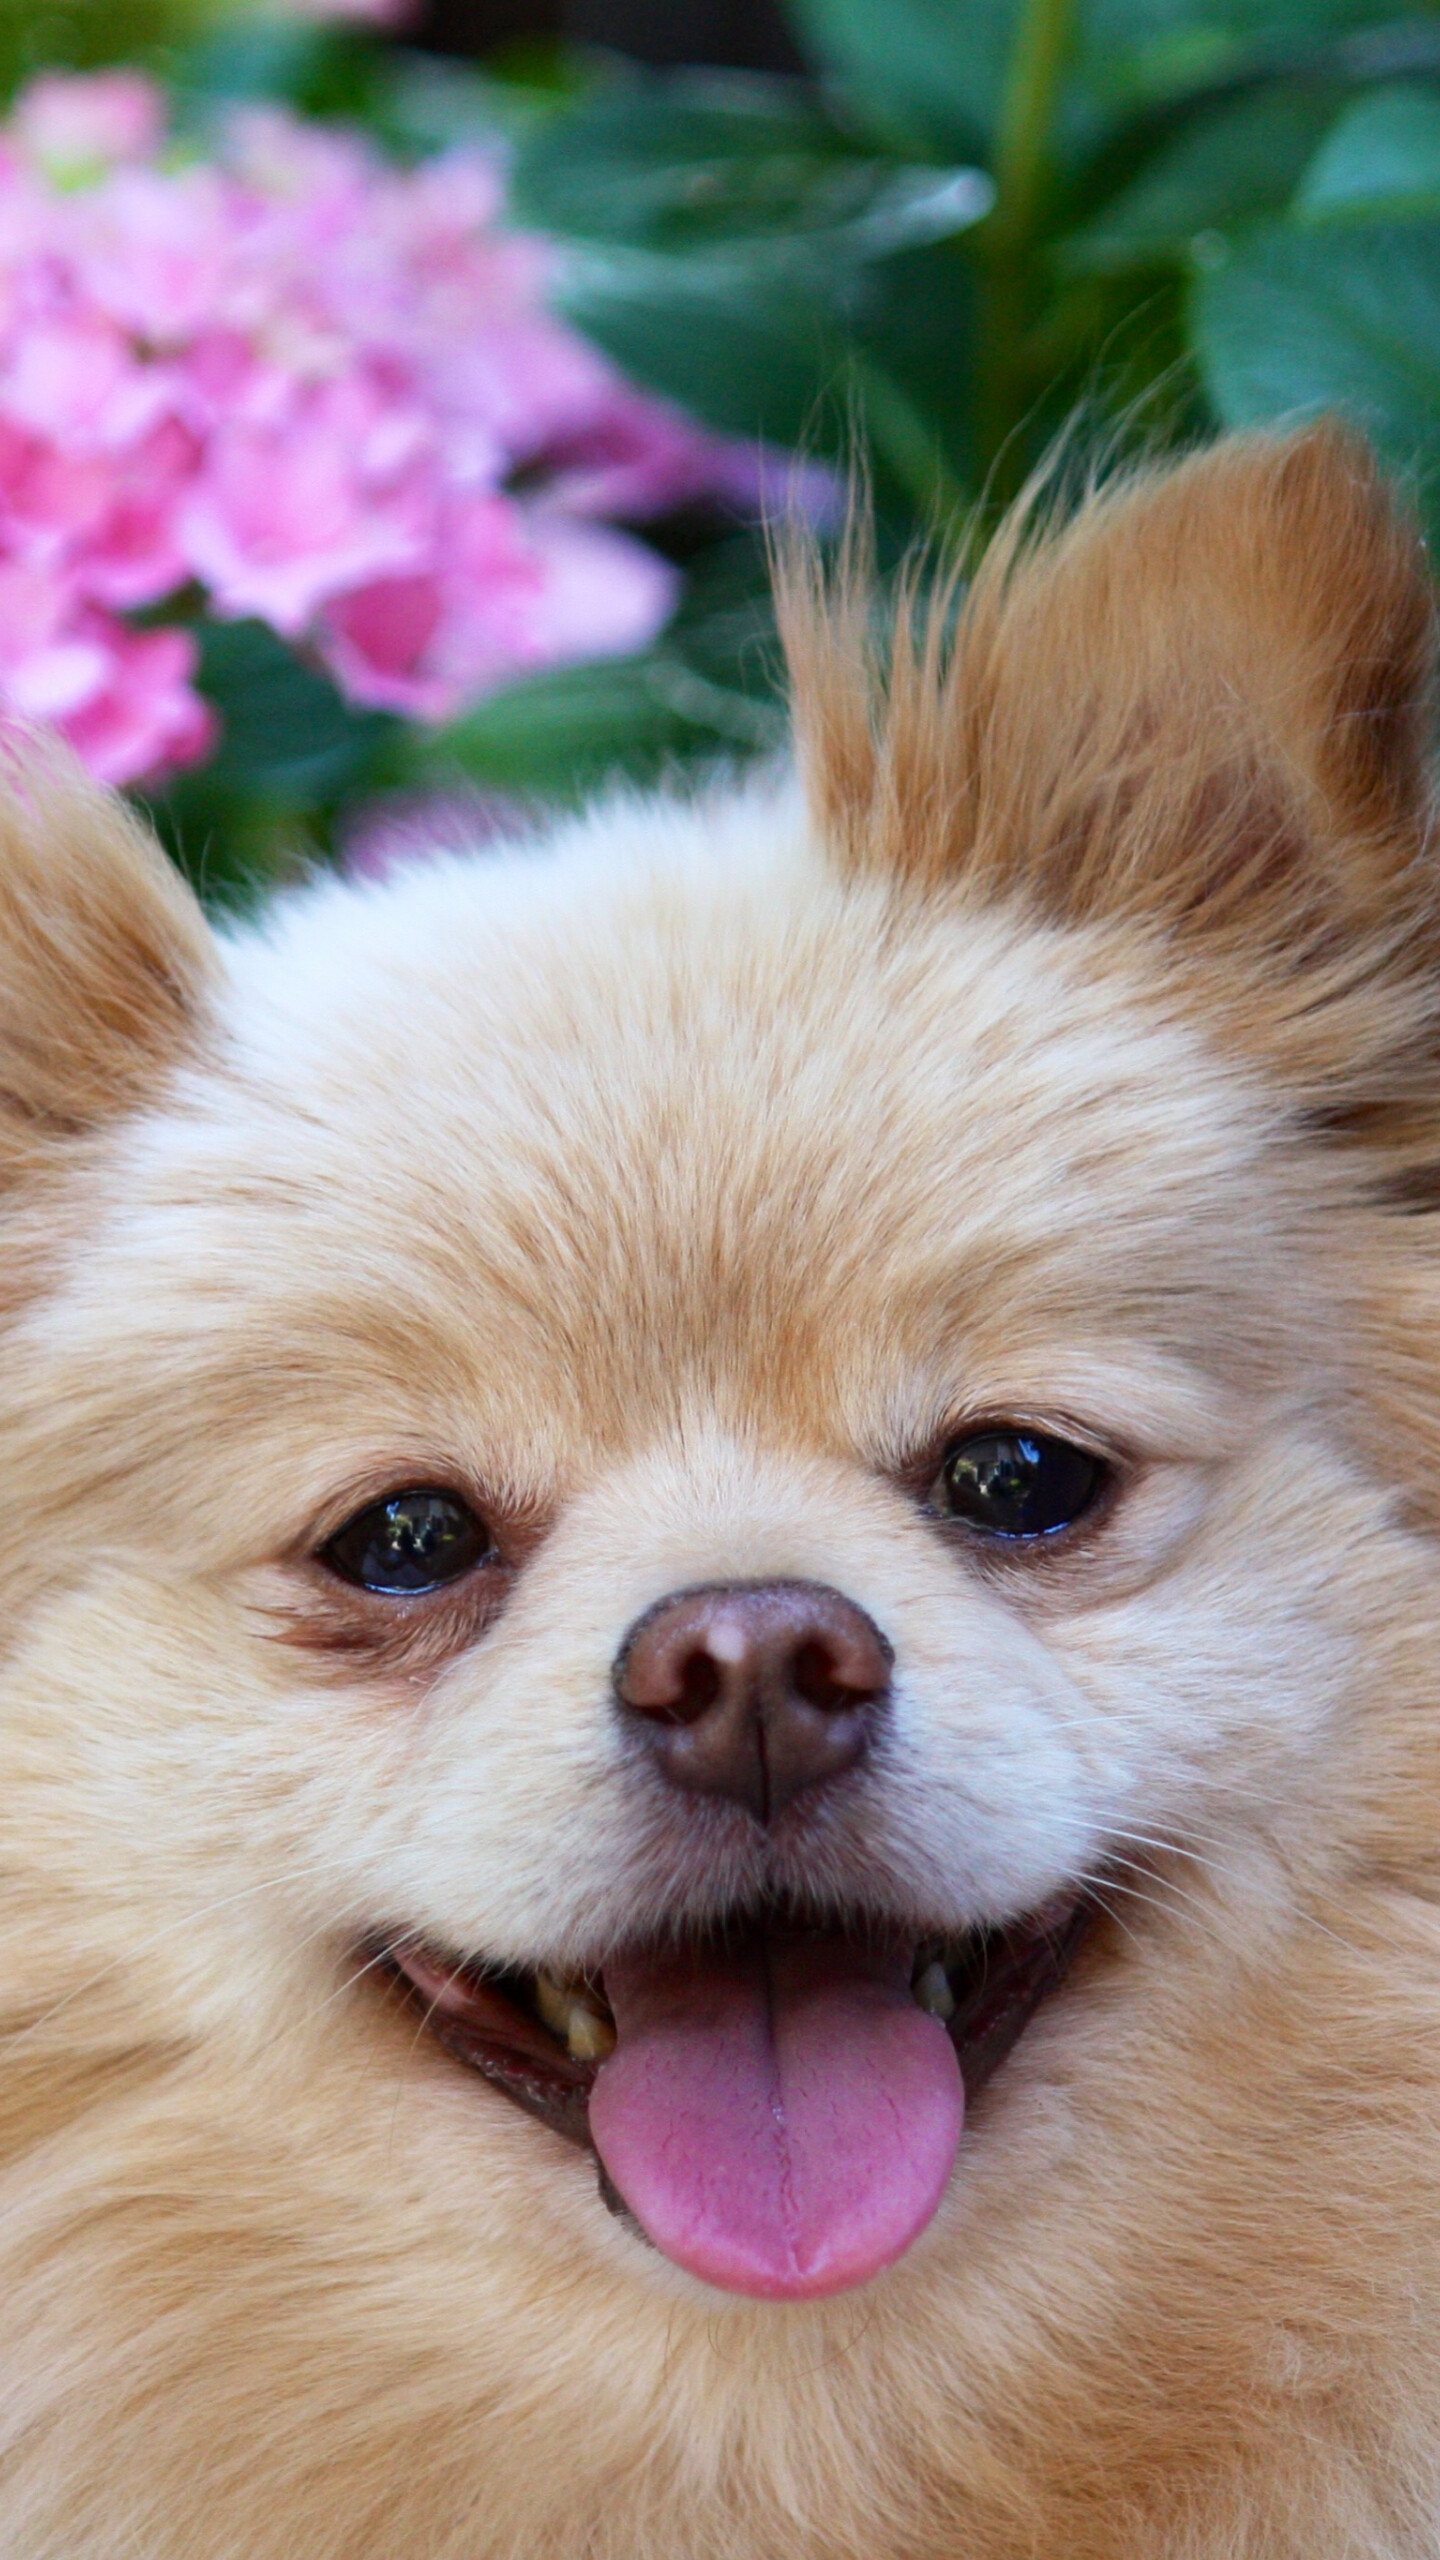 Pomeranian: The breed can be aggressive with other dogs and humans to try to prove themselves. 1440x2560 HD Wallpaper.